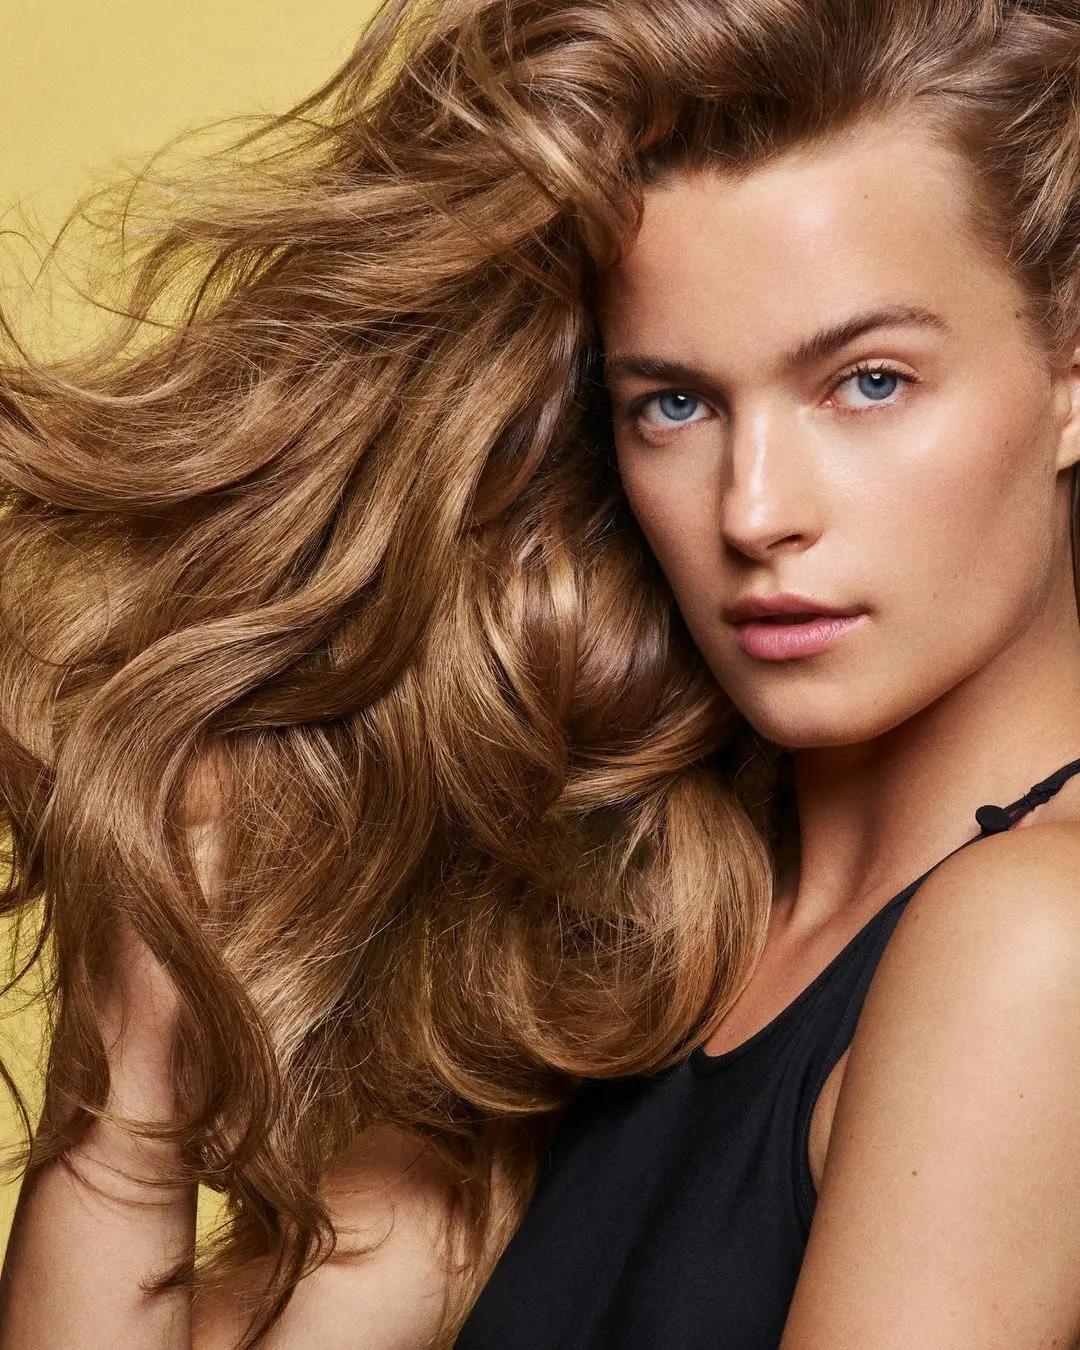 12 Products for Beautiful Hair ...